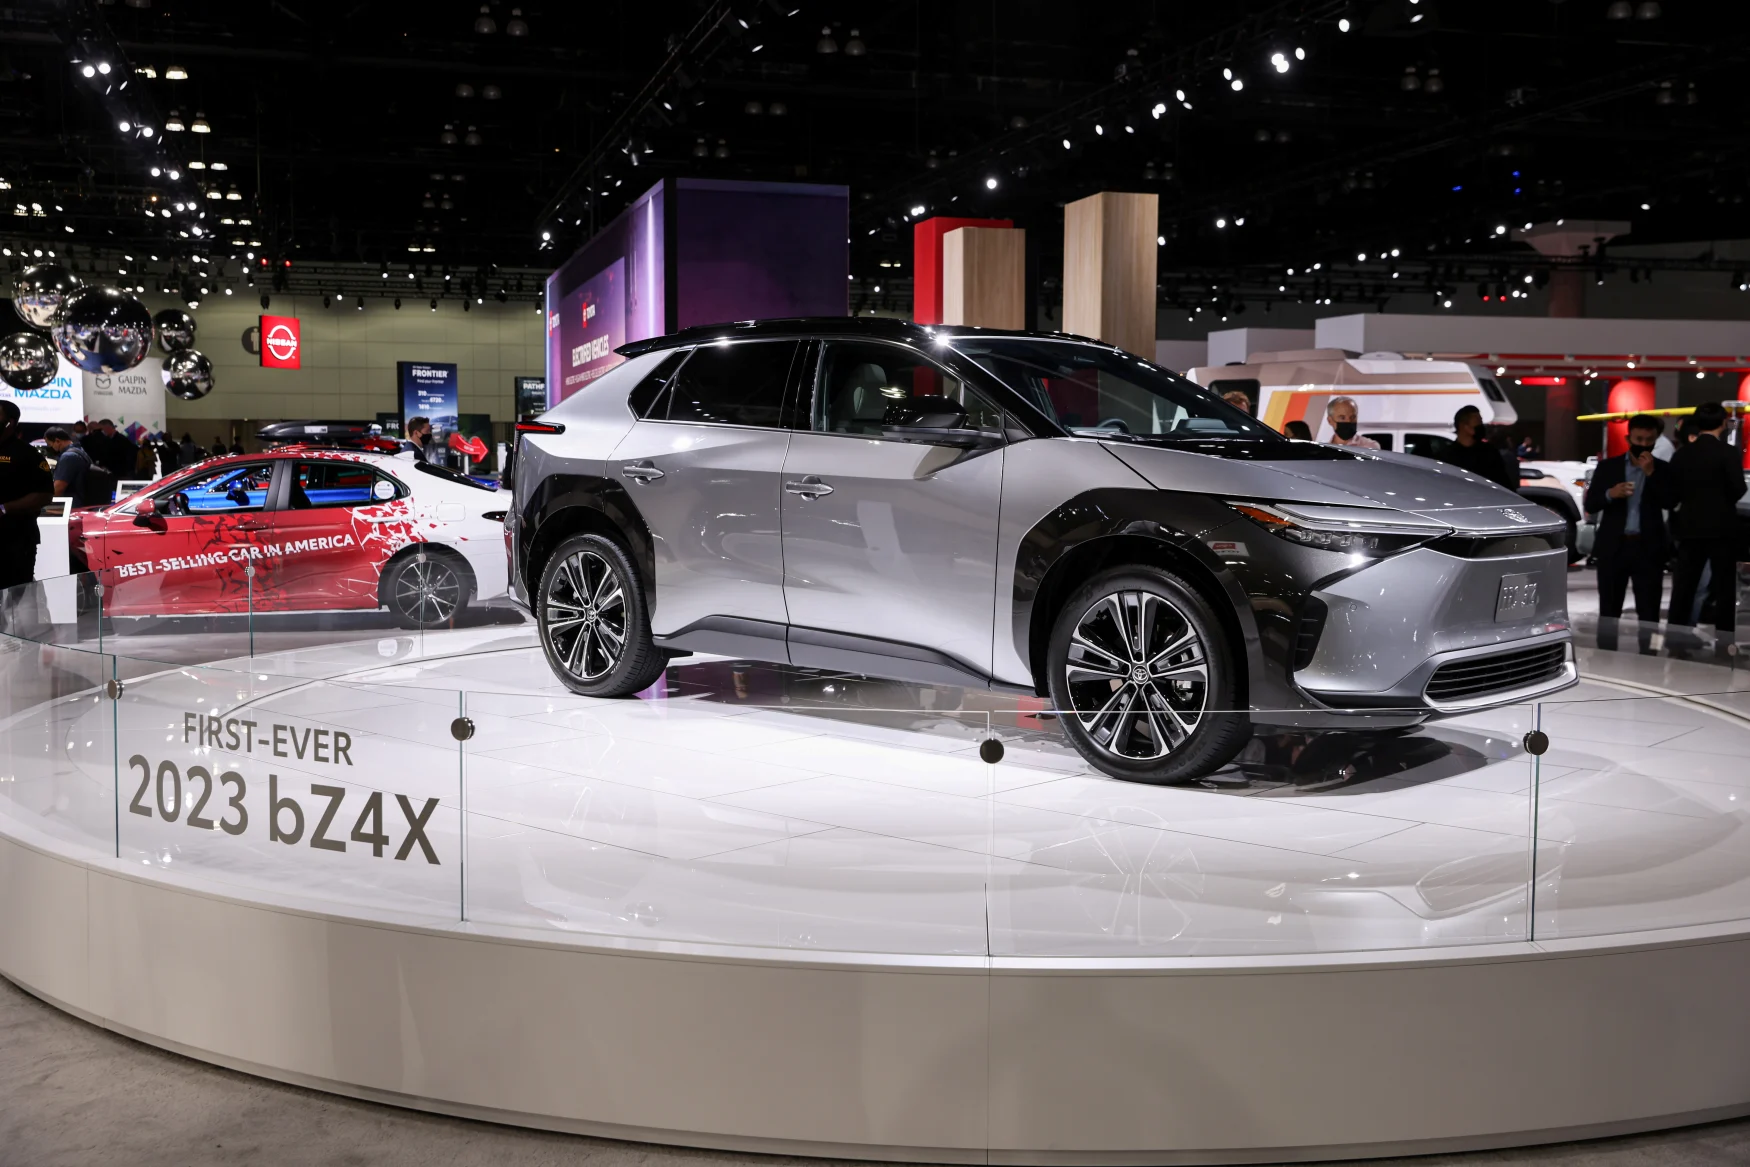 2023 Toyota bZ4X all-electric SUV is displayed during the 2021 LA Auto Show in Los Angeles, California, US November, 17, 2021. REUTERS/Mike Blake